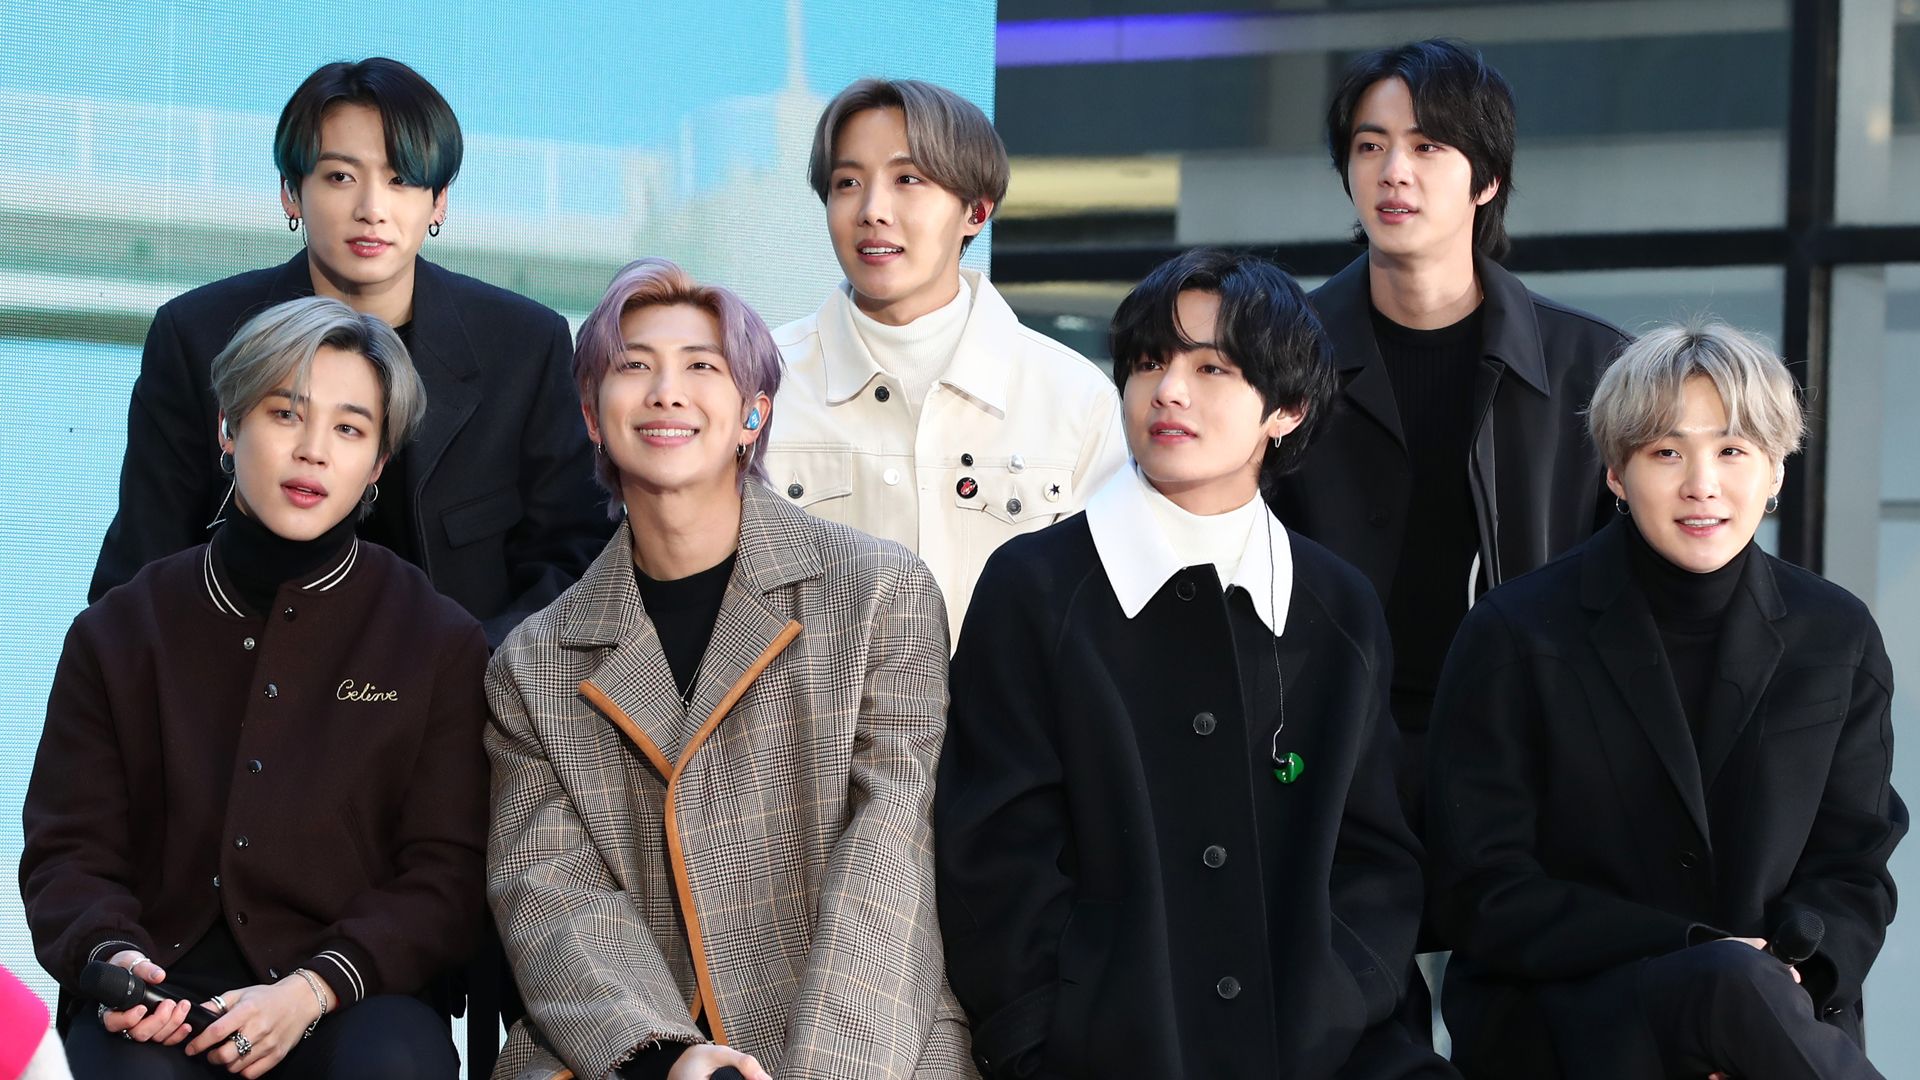 BTS Quotes About ARMY That Prove the Depth of Their Love Hasn't Changed Since Debut